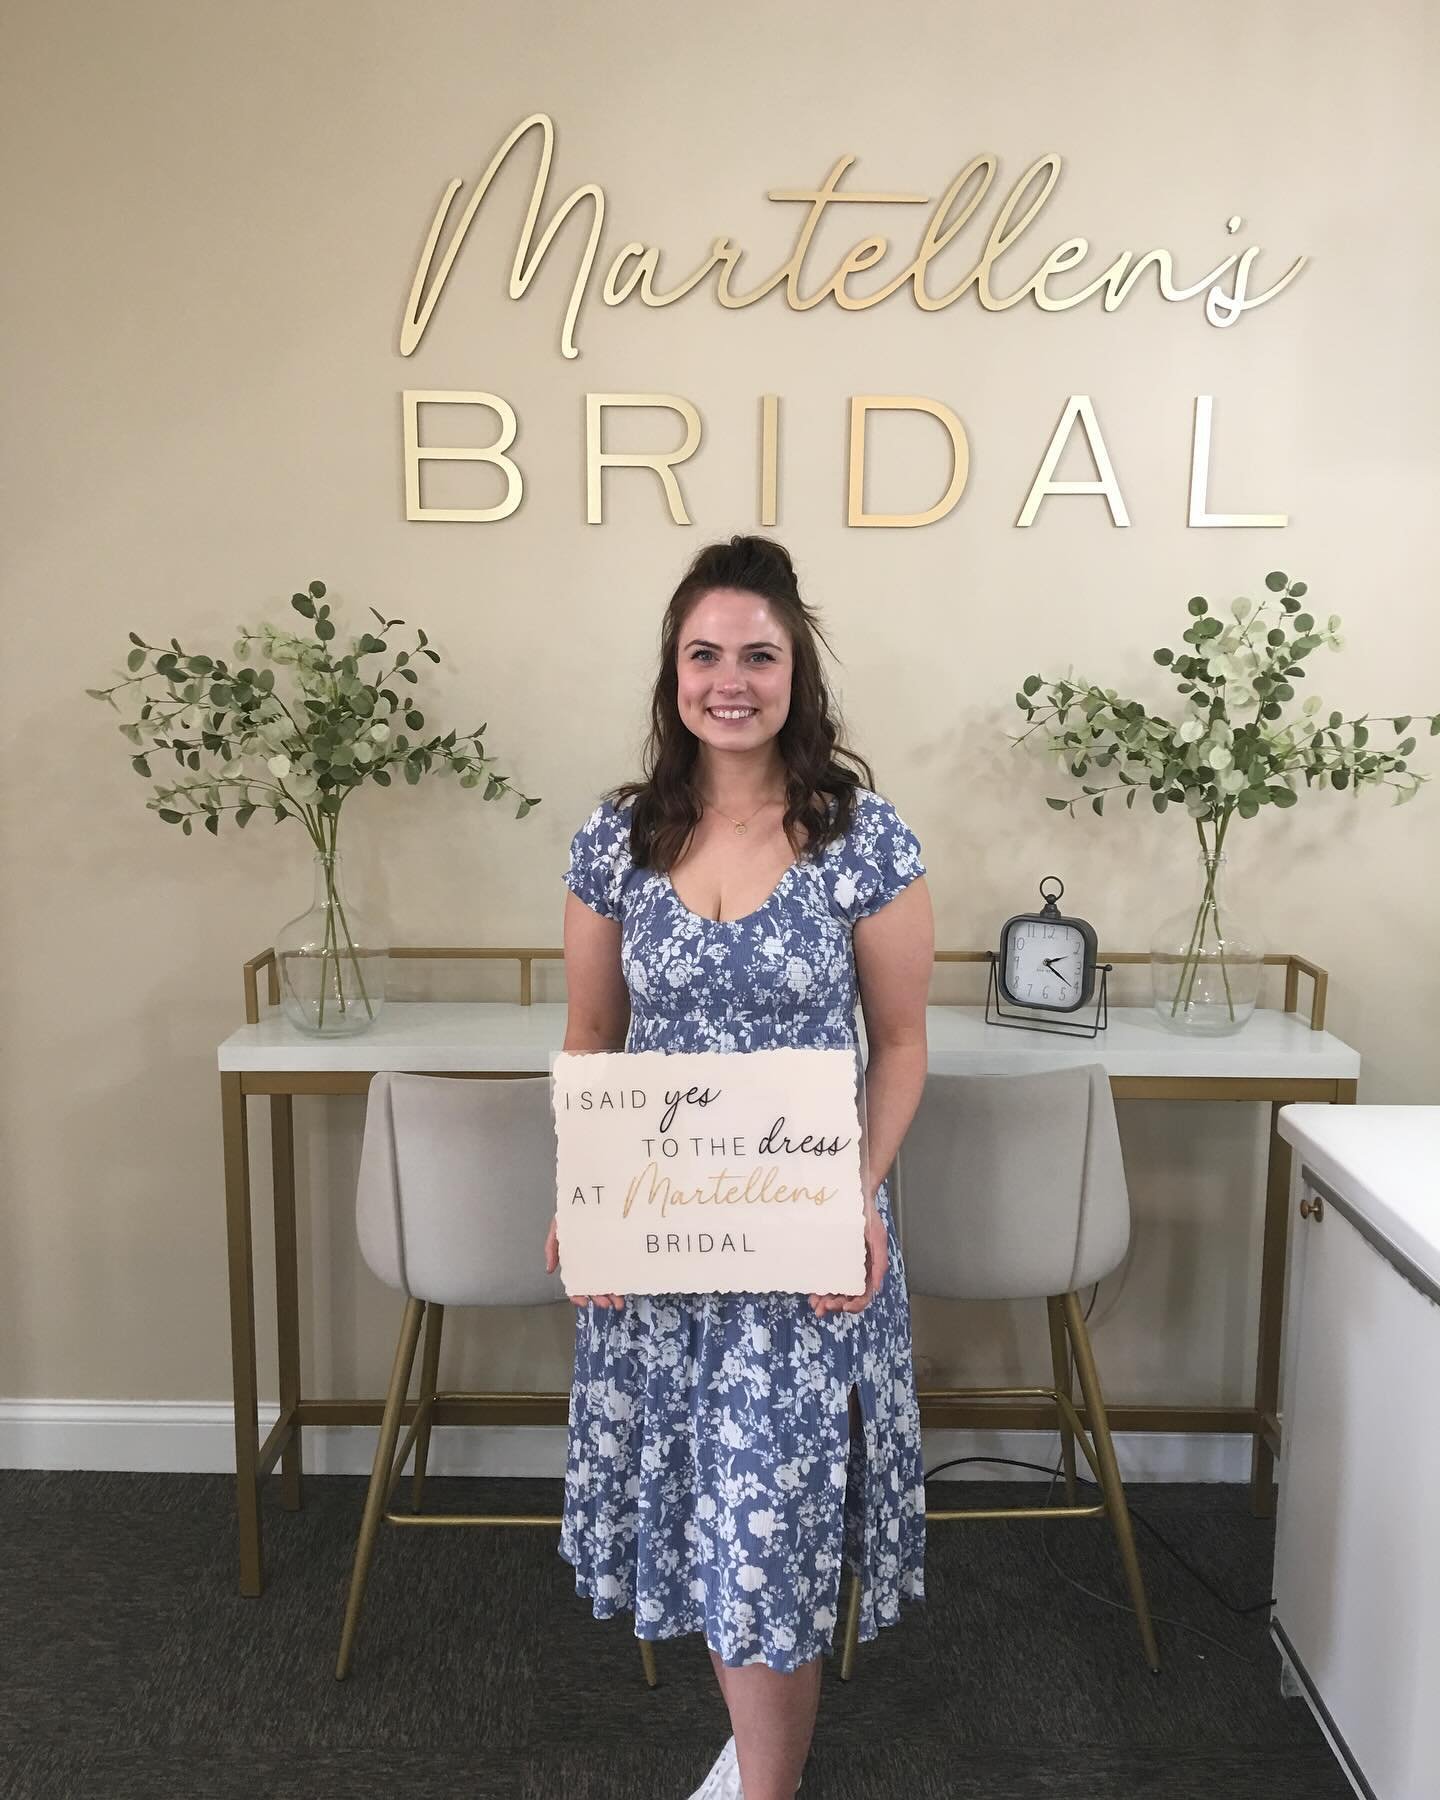 Congratulations to last weekends bride!! We are so happy you found your dream gown at Martellen&rsquo;s! 🤍✨

#martellensbridal #chicagolandbridalboutique #weddingdress #sayyestothedress #midwestbridal #downtownlemont #shopsmall